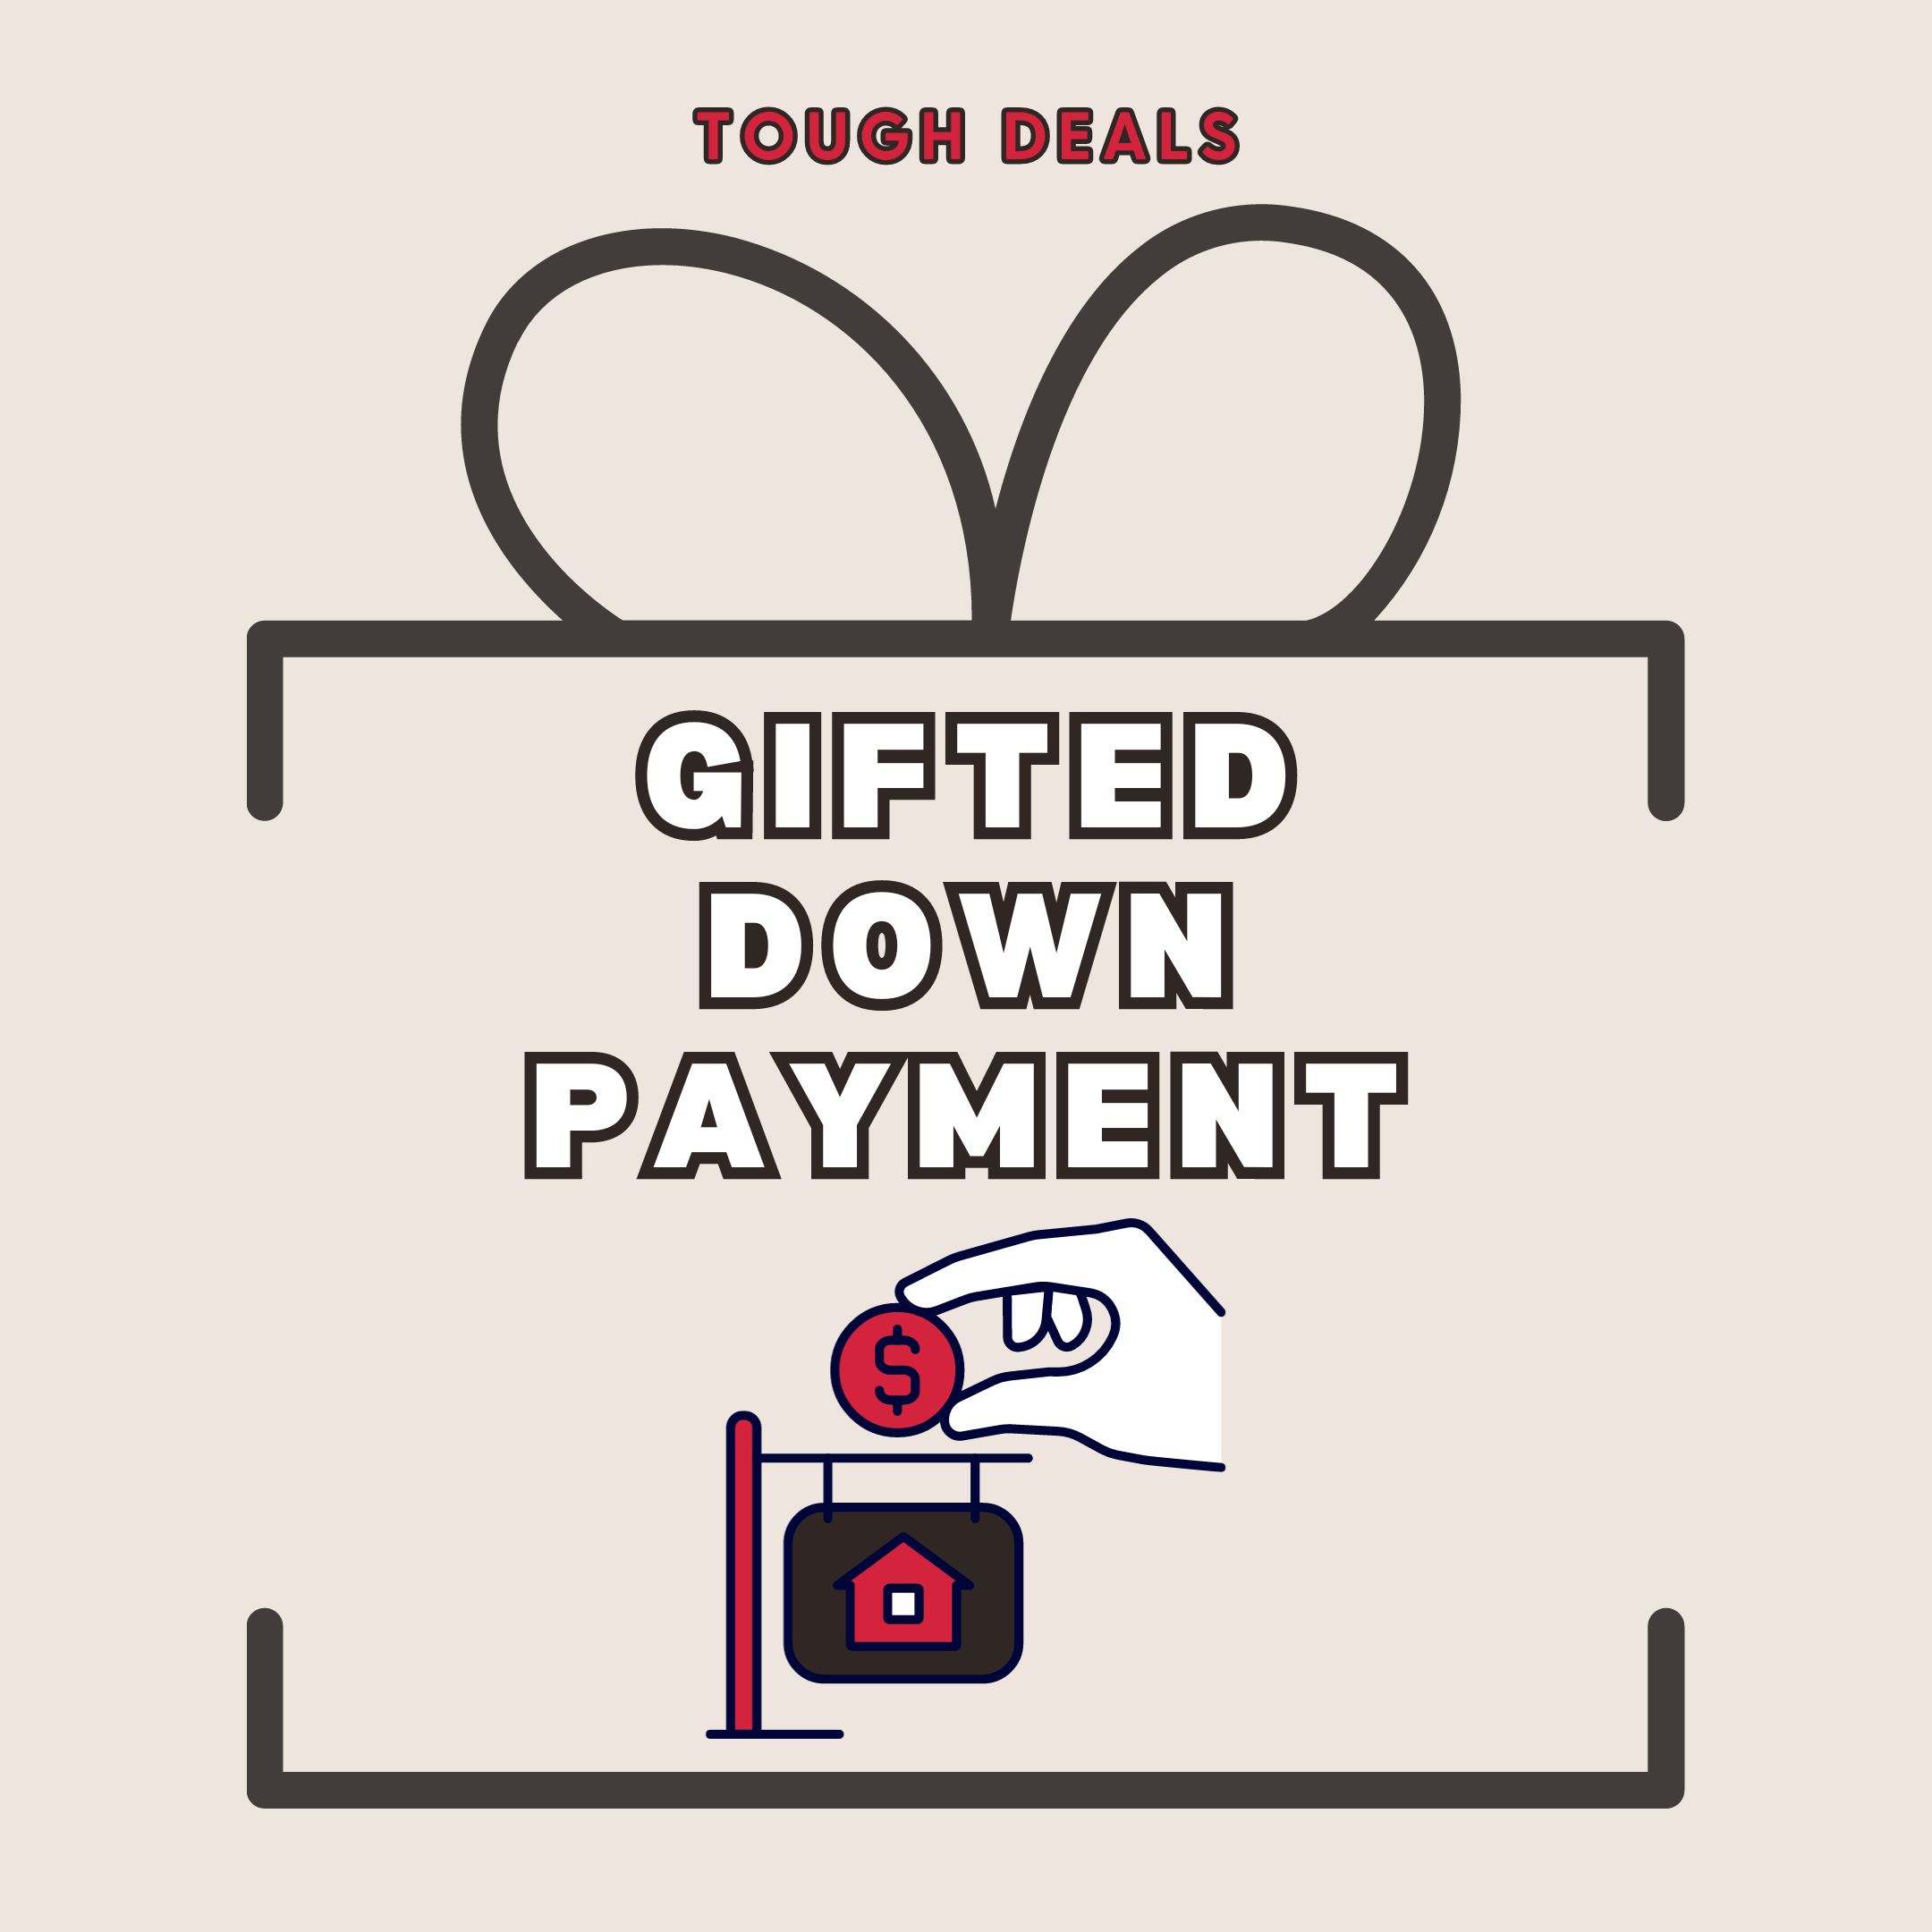 Gifted Down Payment - How Does it Work?